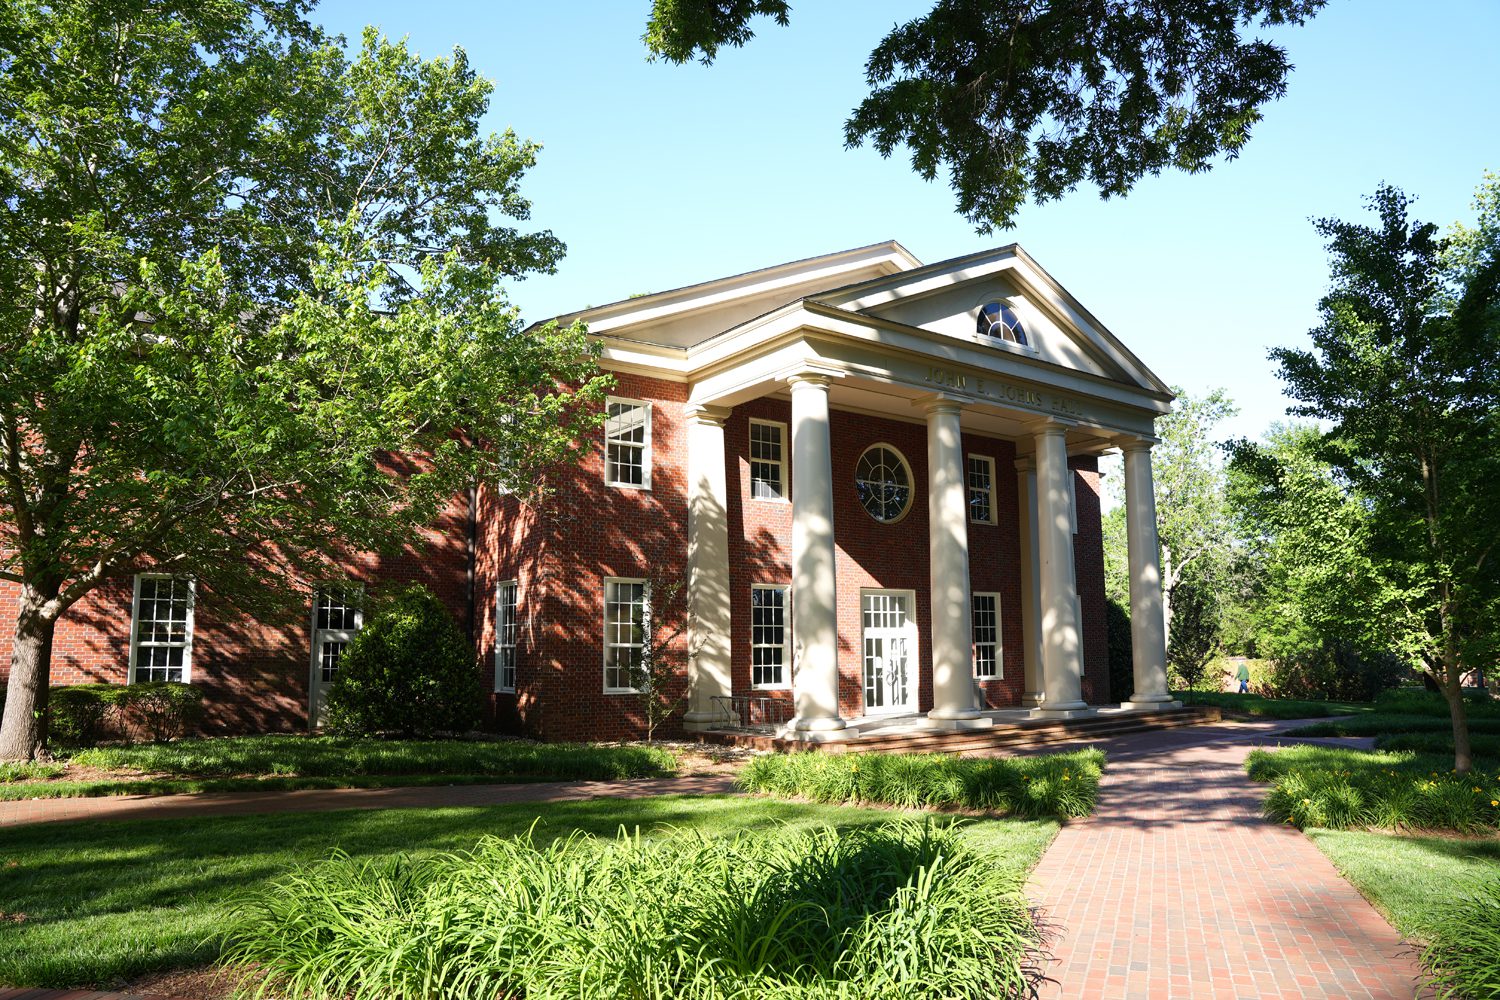 Exterior view of Johns Hall